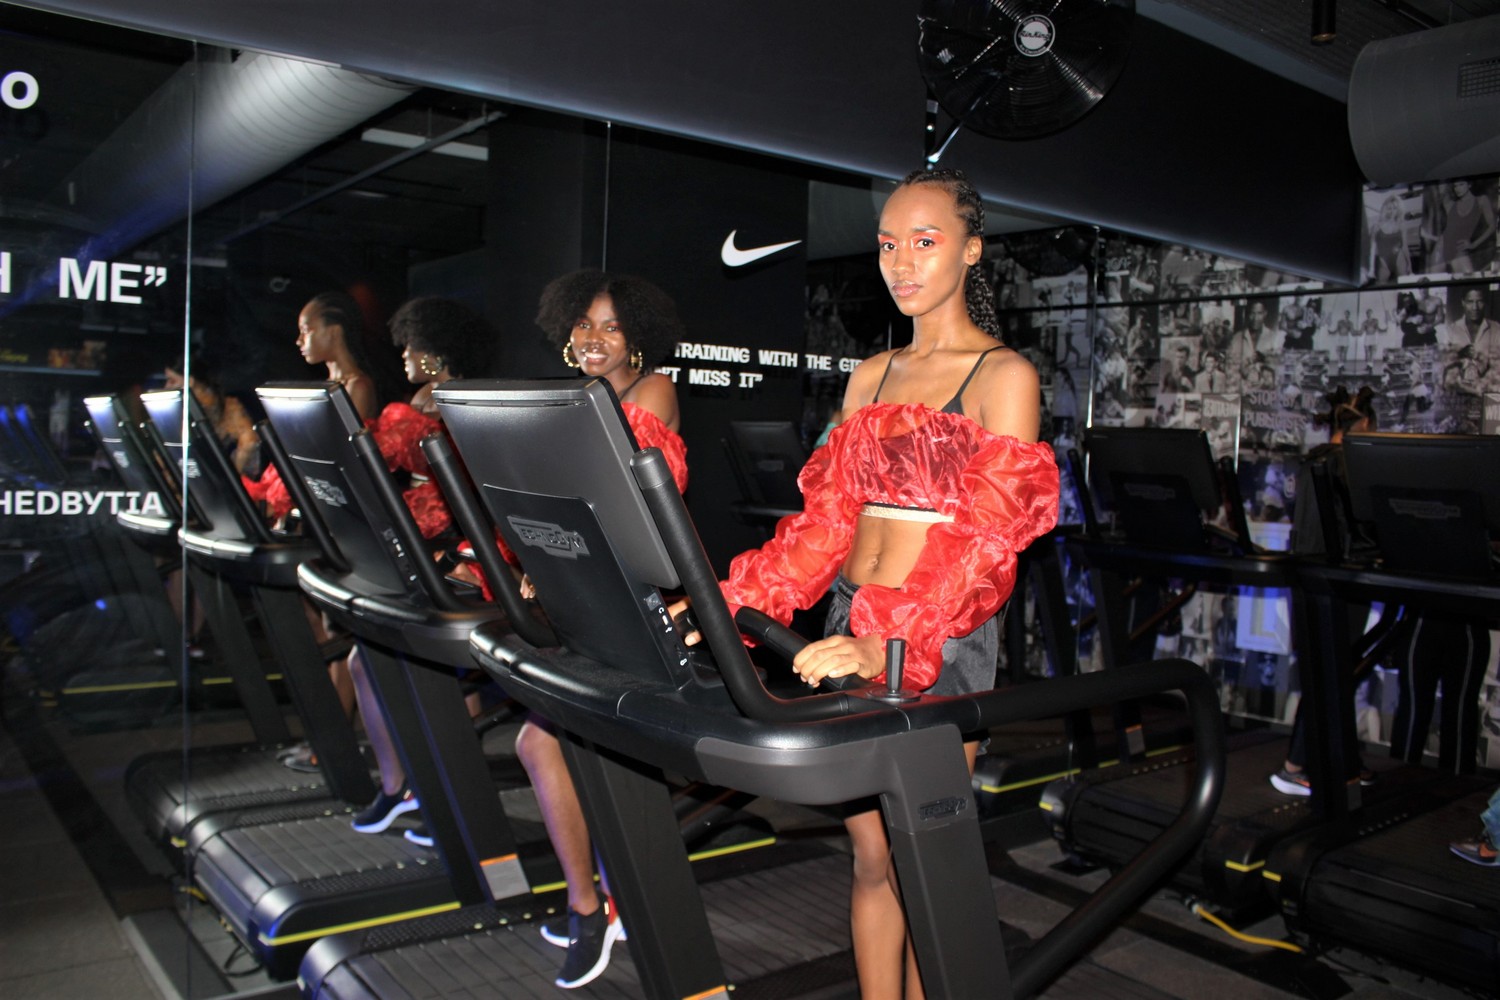 trampa chocolate Constituir Nike And Slashed By Tia Celebrate Strength Of Femininity With Dance And  Fitness-Themed Presentation | SNOBETTE